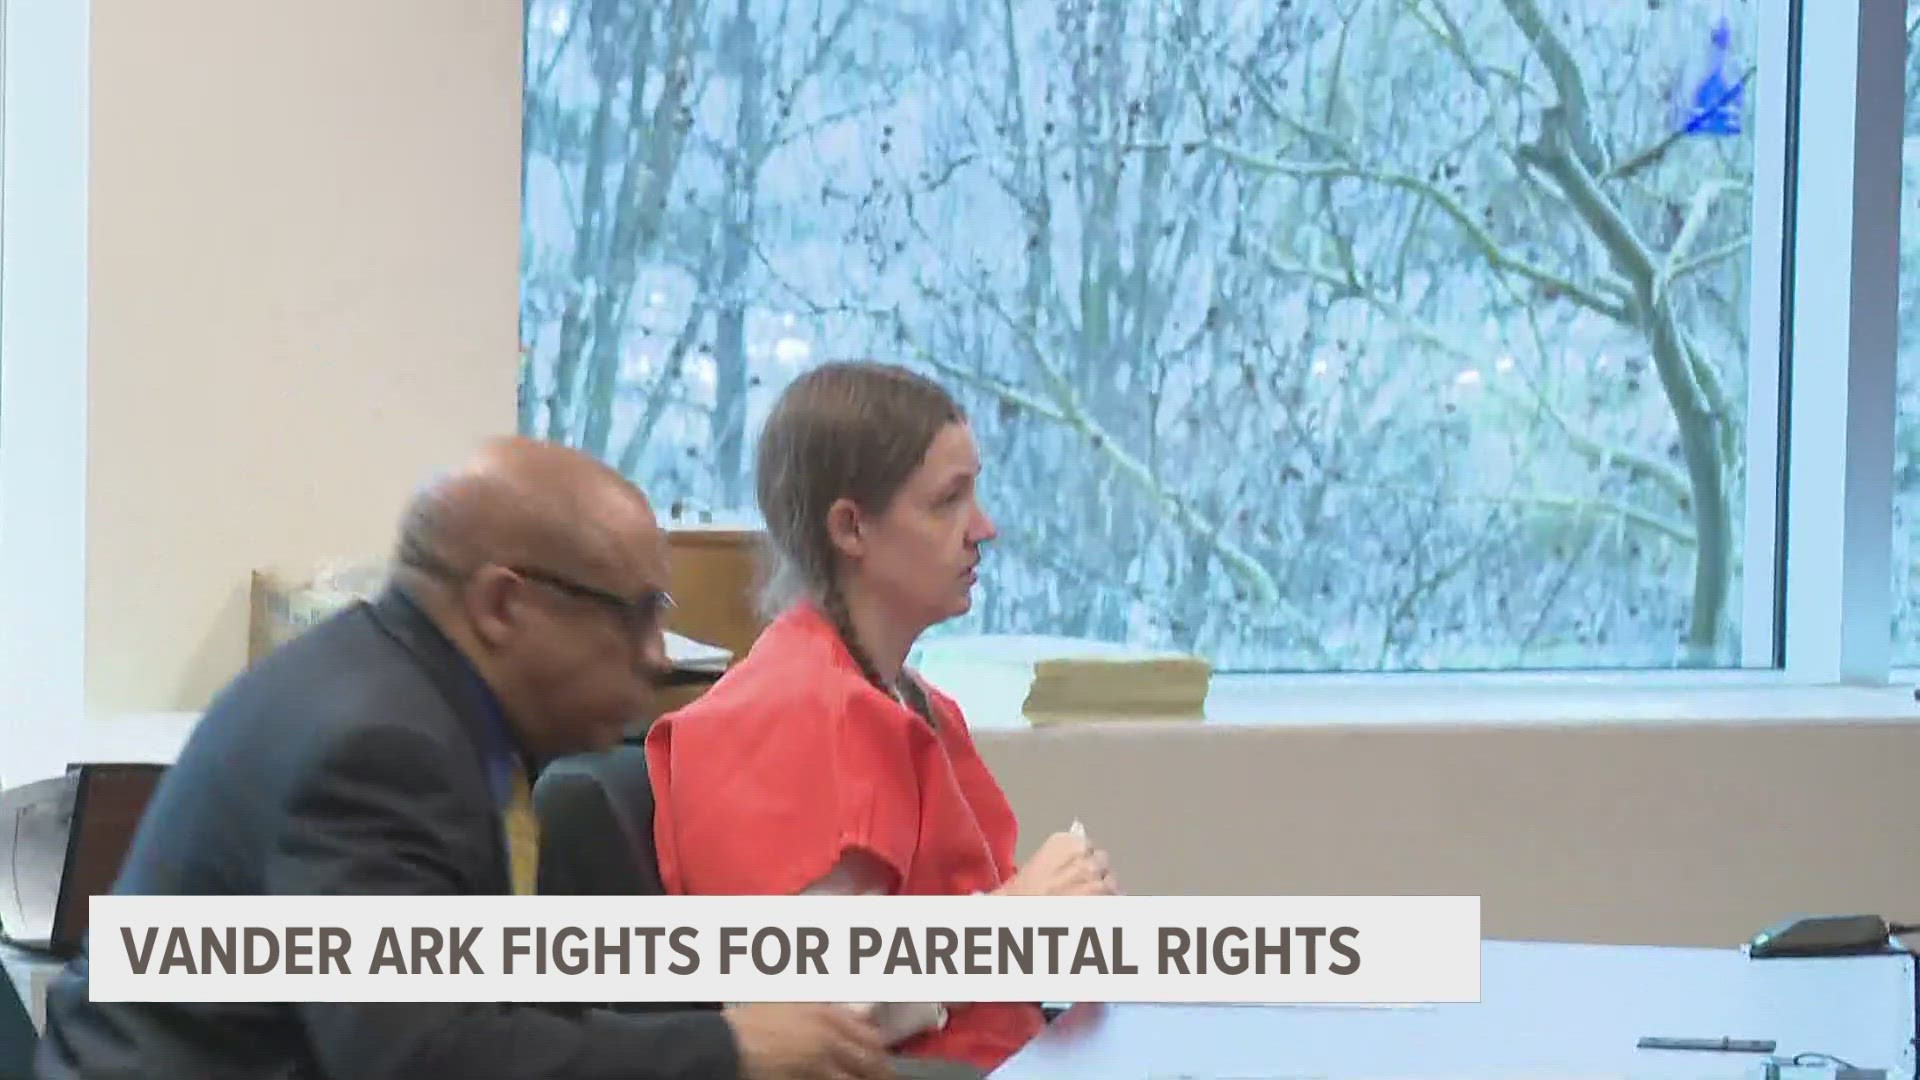 The woman convicted of killing her son wants to be able to make decisions for her other child.